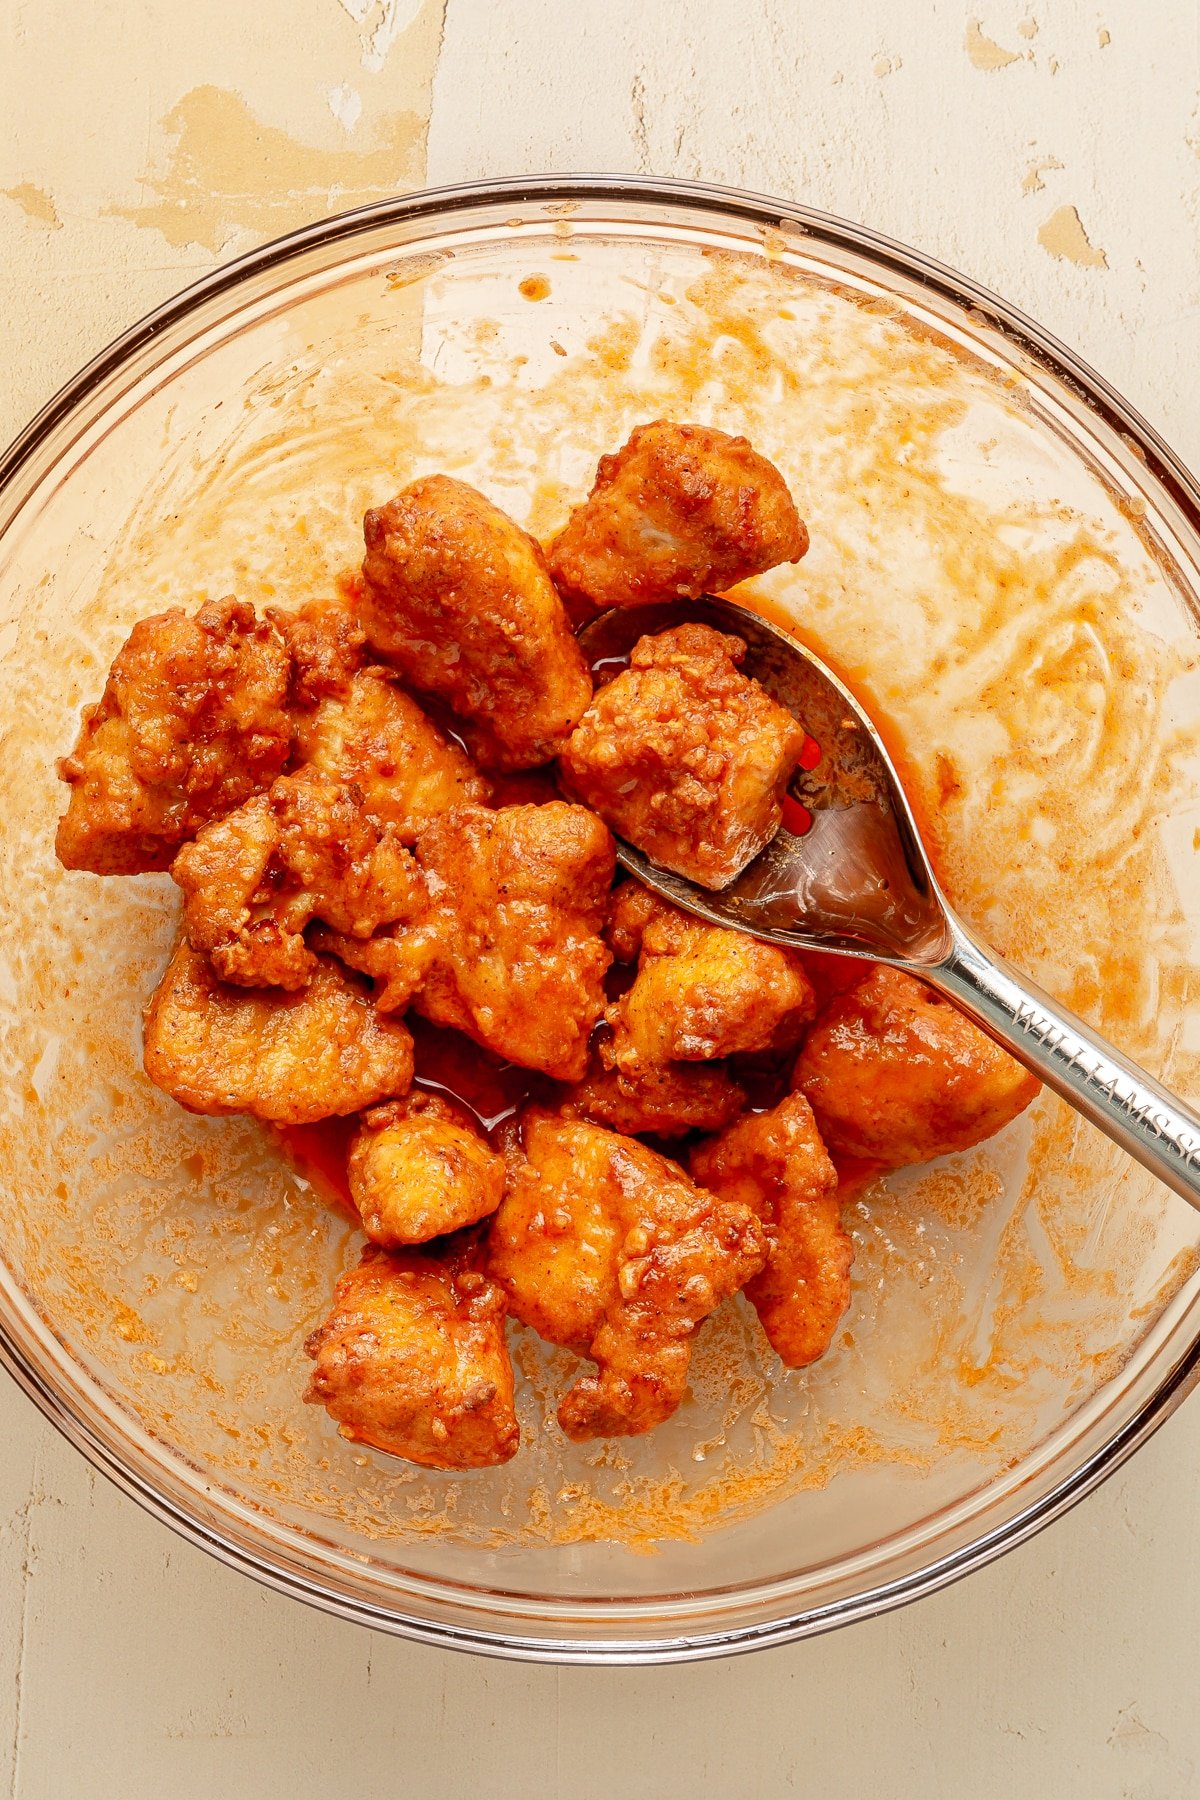 Chicken bites are shown being tossed in buffalo sauce with a metal spoon.